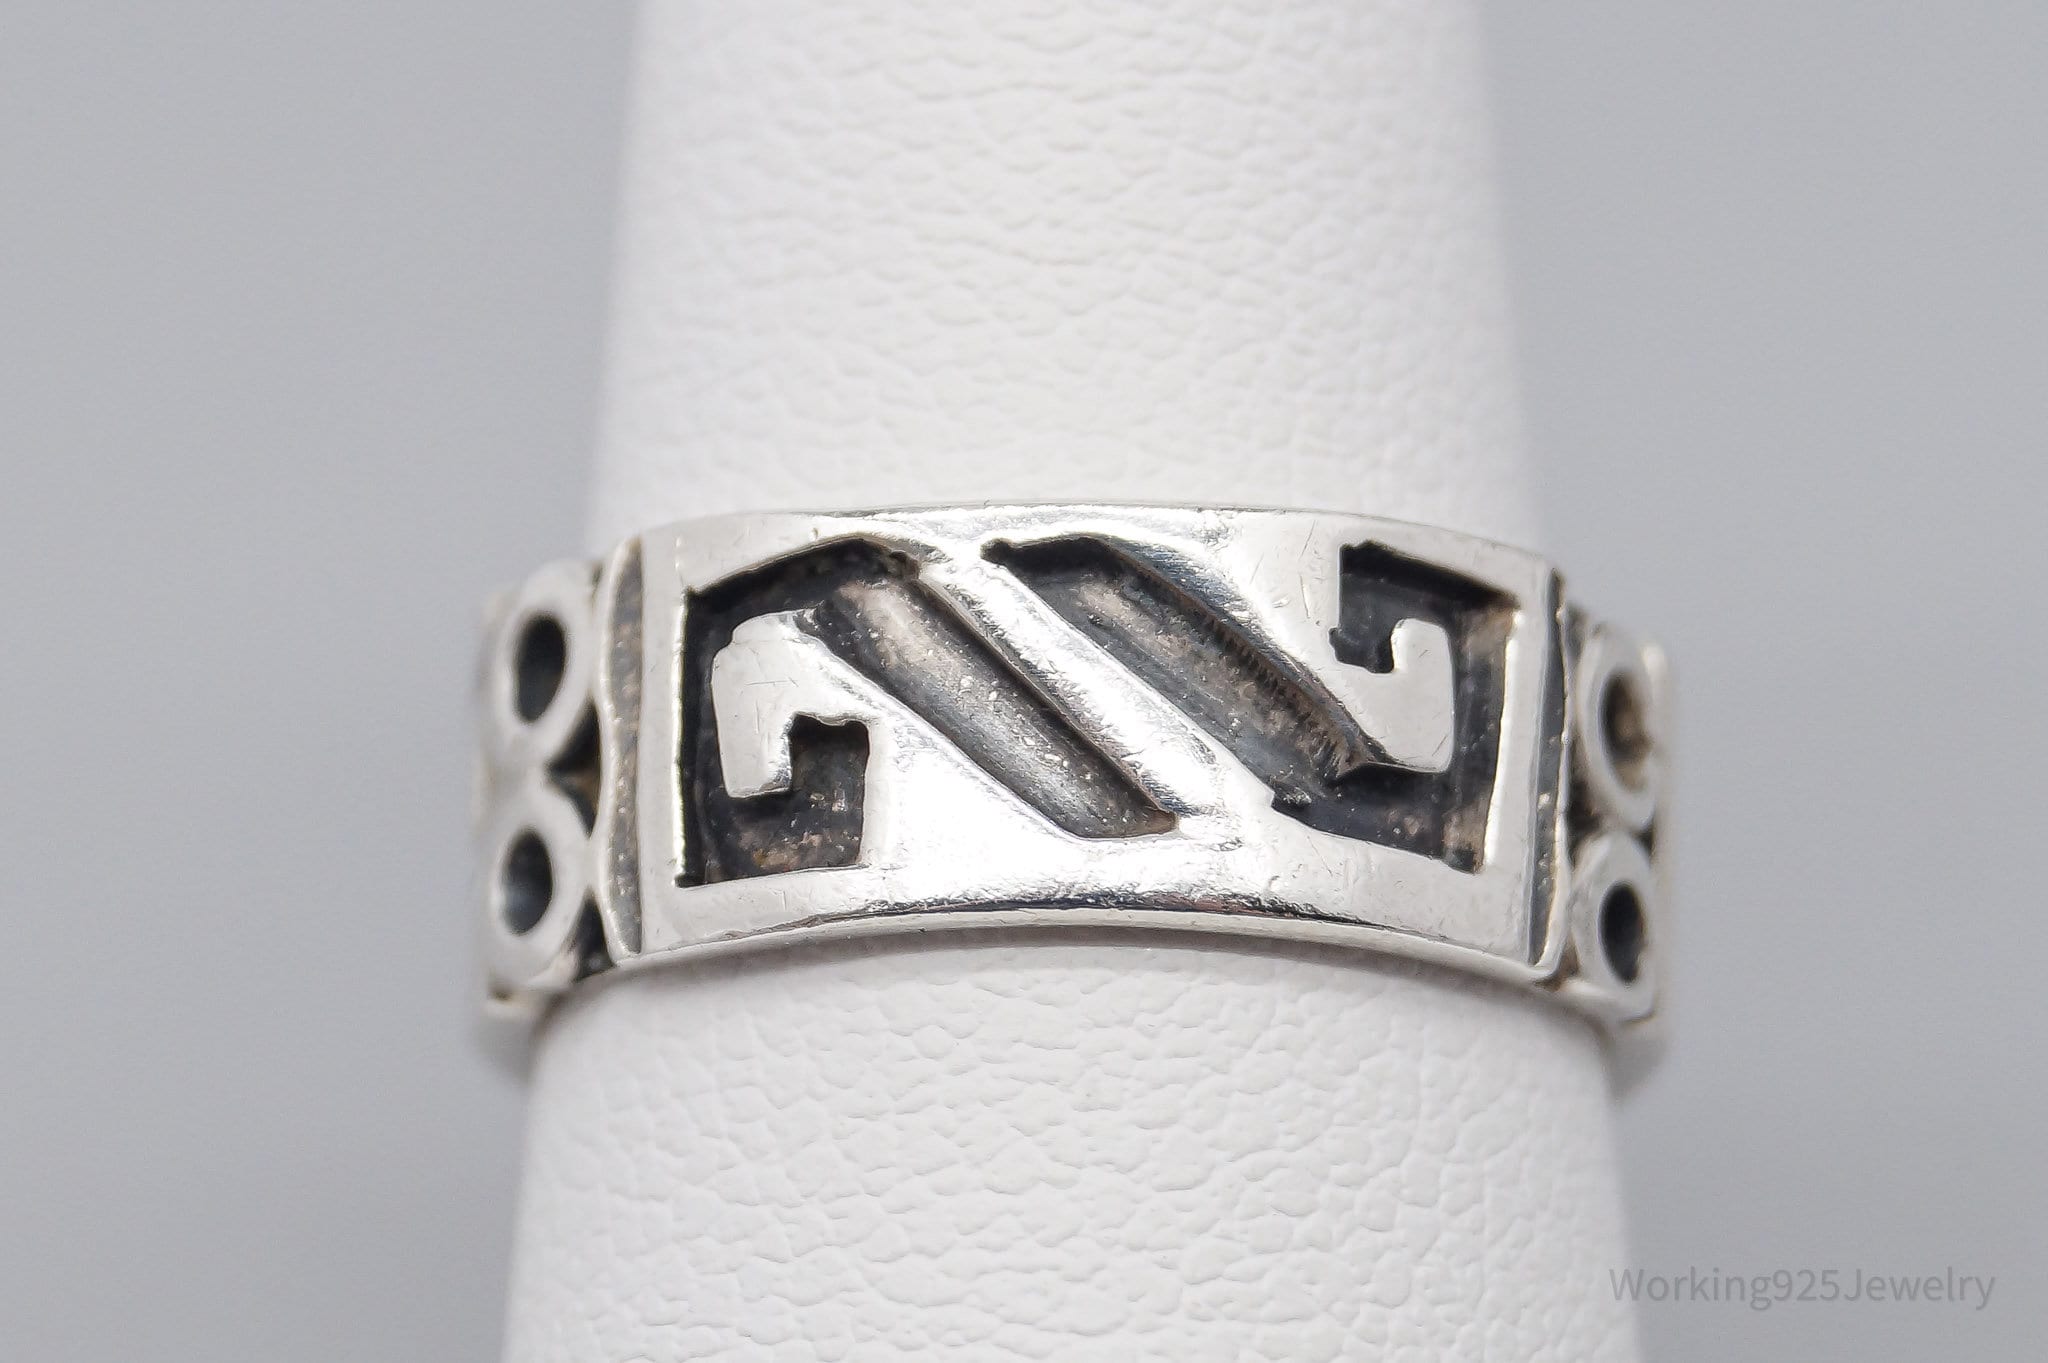 Vintage Mexico Modernist Sterling Silver Band Ring - Size 5.75